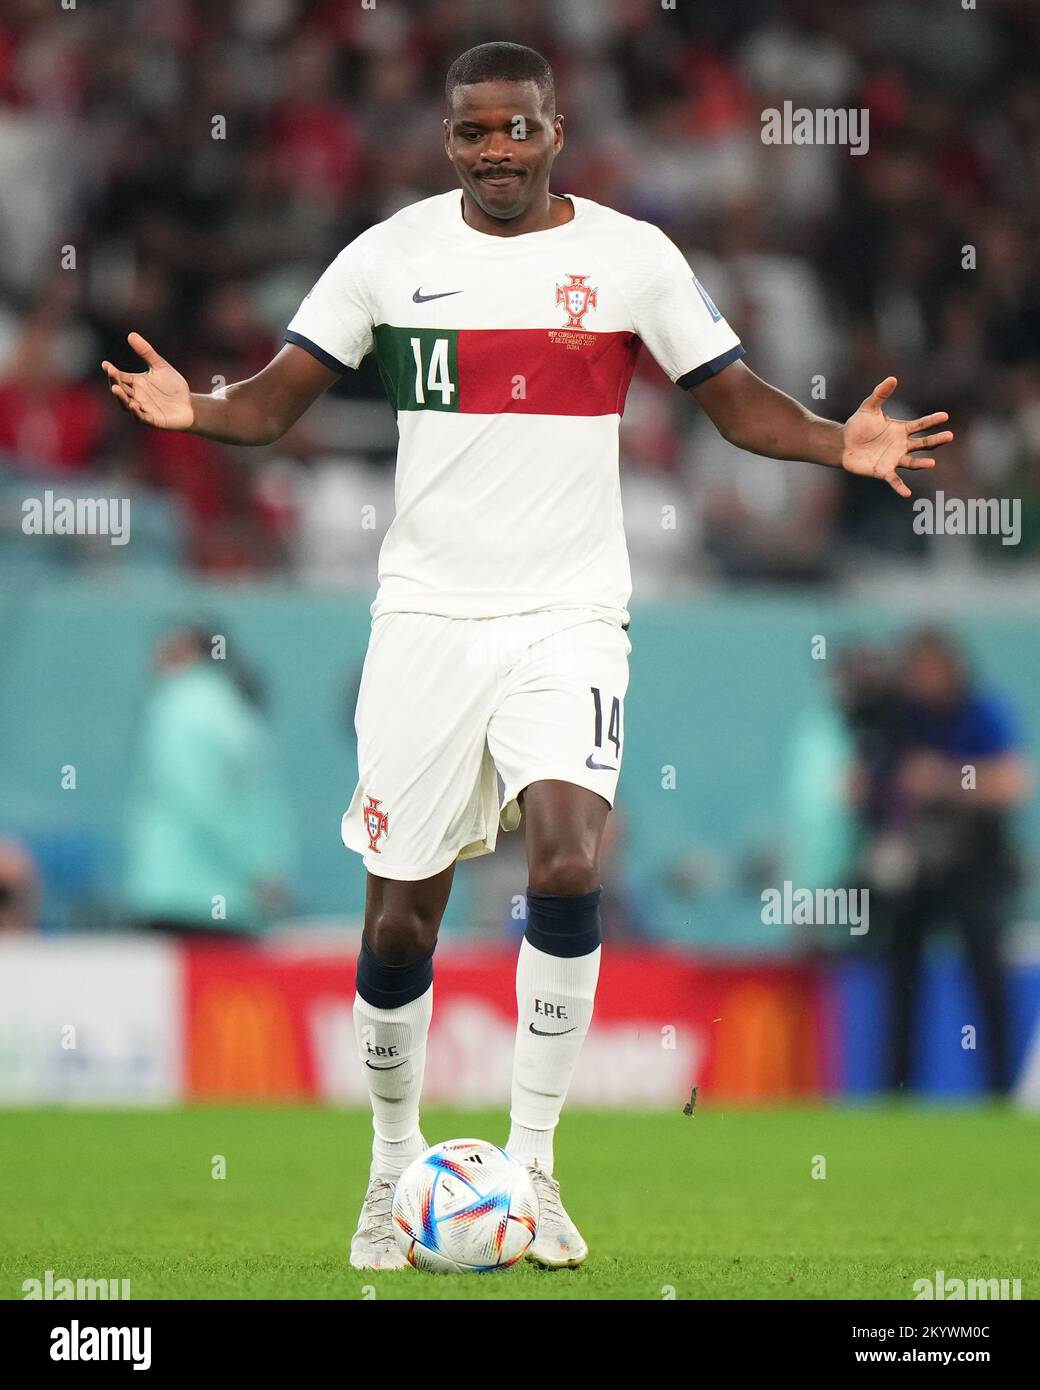 William Carvalho of Portugal during the FIFA World Cup Qatar 2022 match, Group H, between South Korea v Portugal played at Education City Stadium on Dec 2, 2022 in Doha, Qatar. (Photo by Bagu Blanco / PRESSIN) Stock Photo